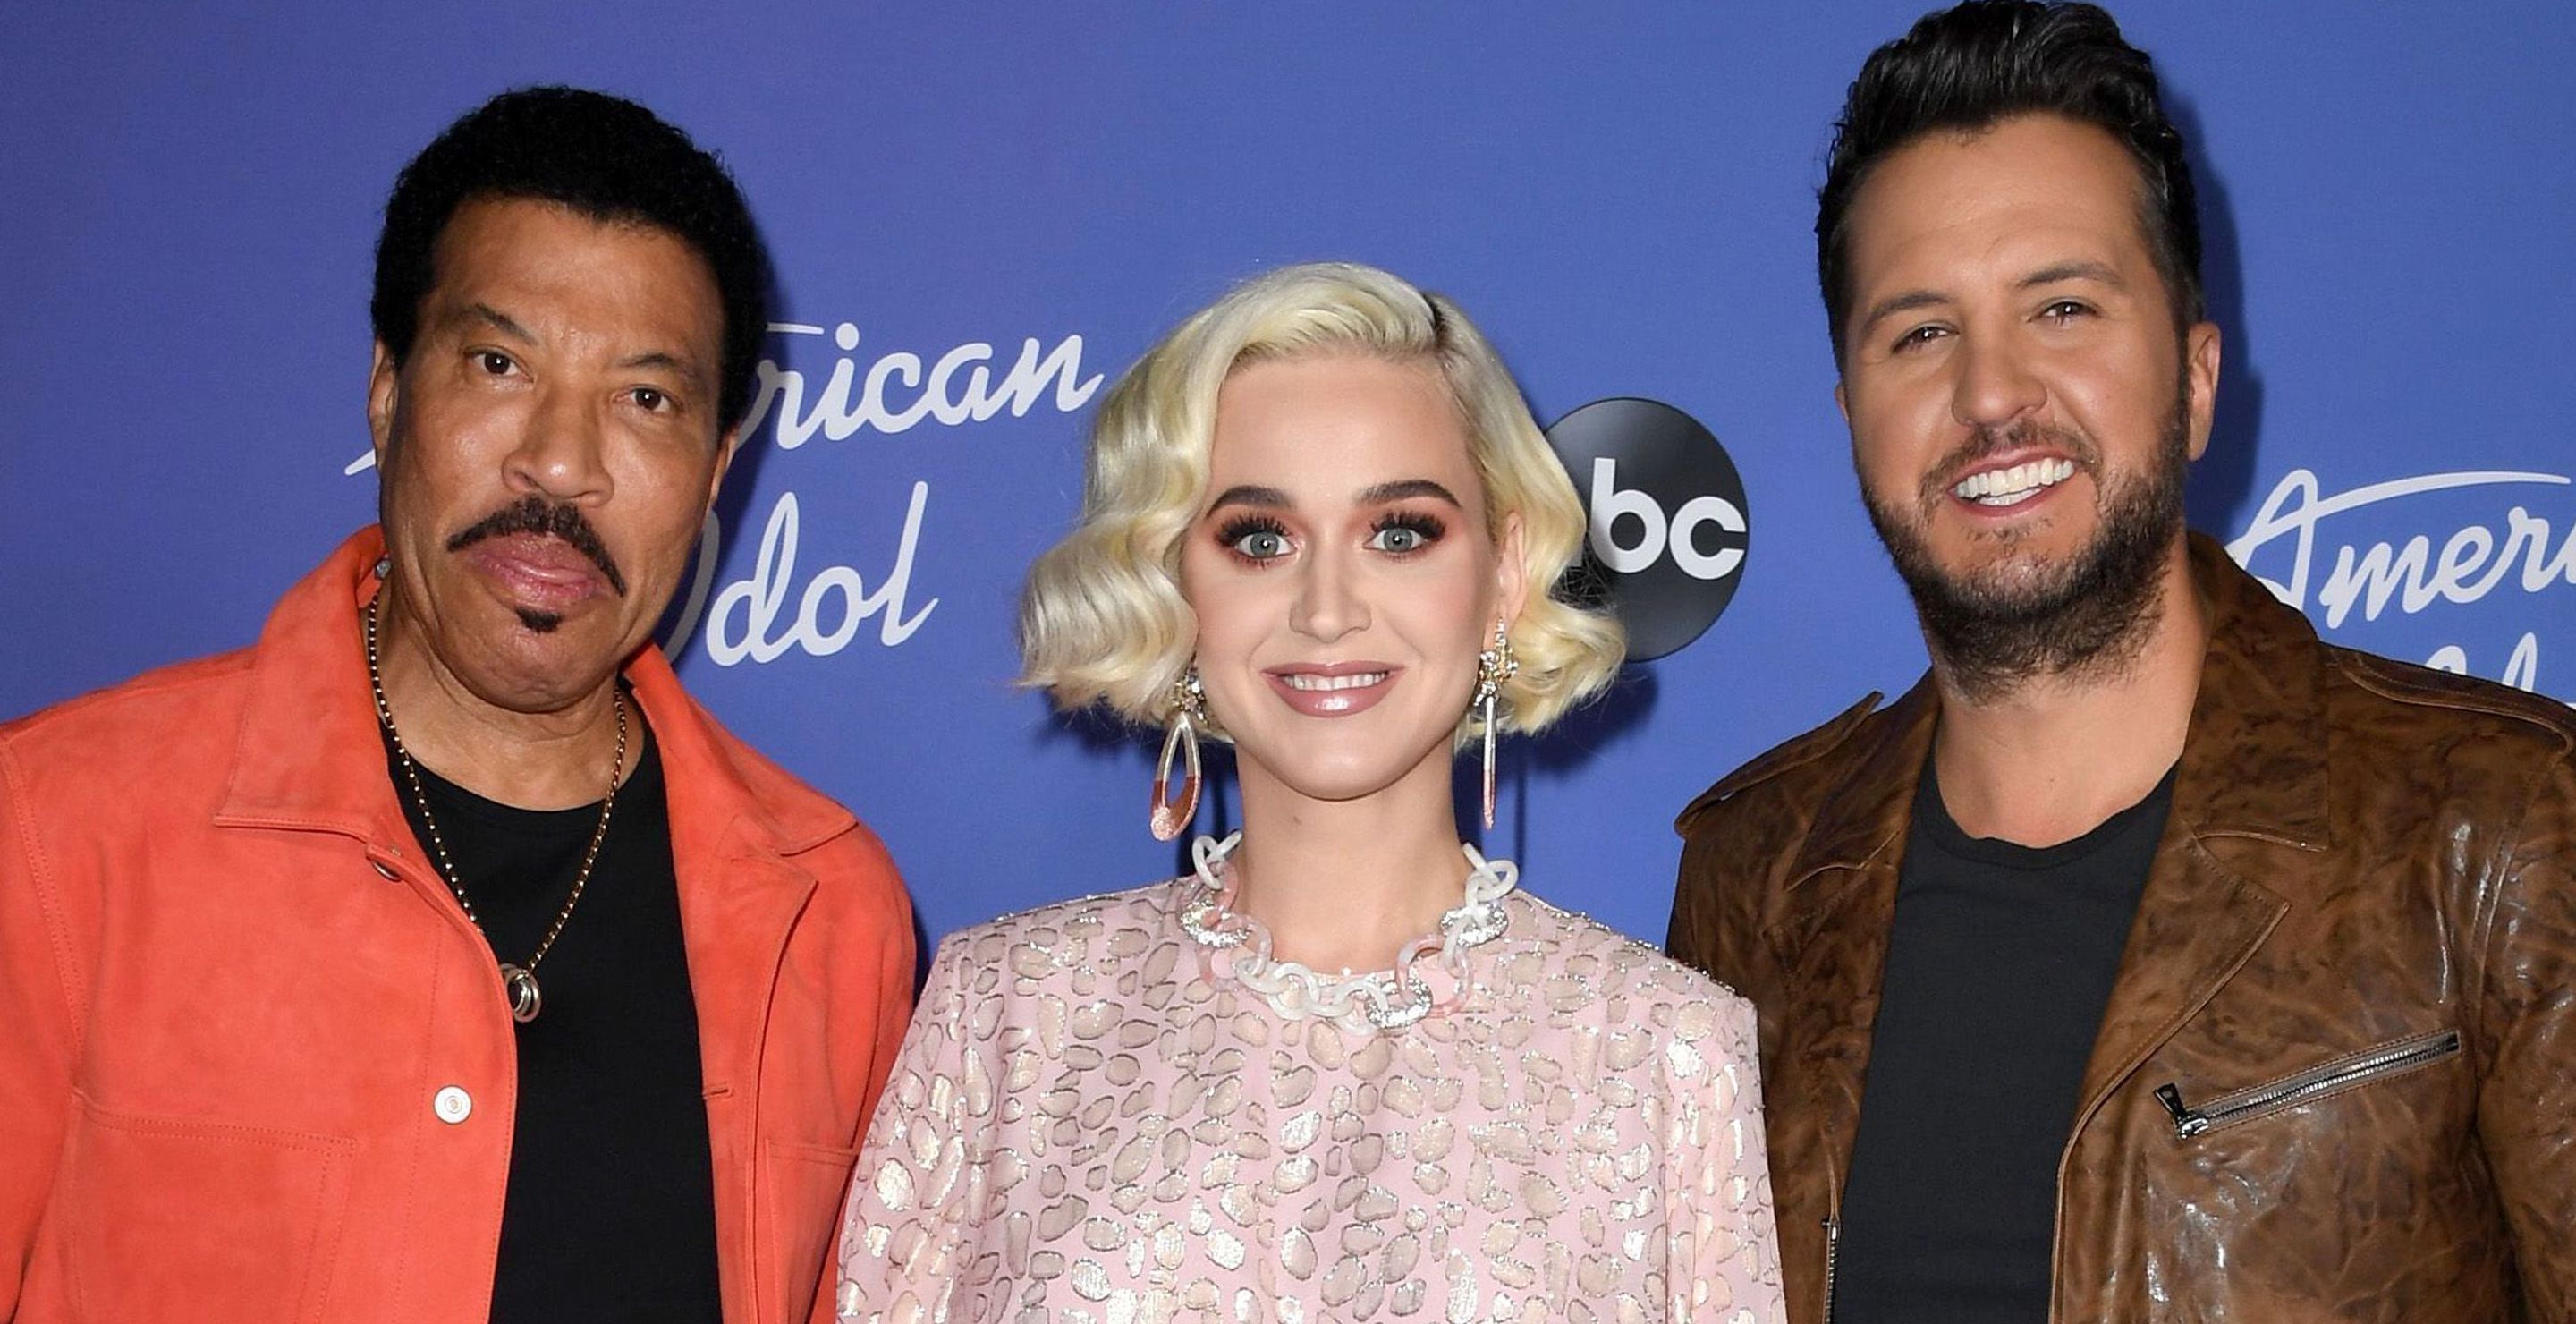 luke-bryan-shares-thoughts-on-katy-perrys-american-idol-departure-and-his-own-future